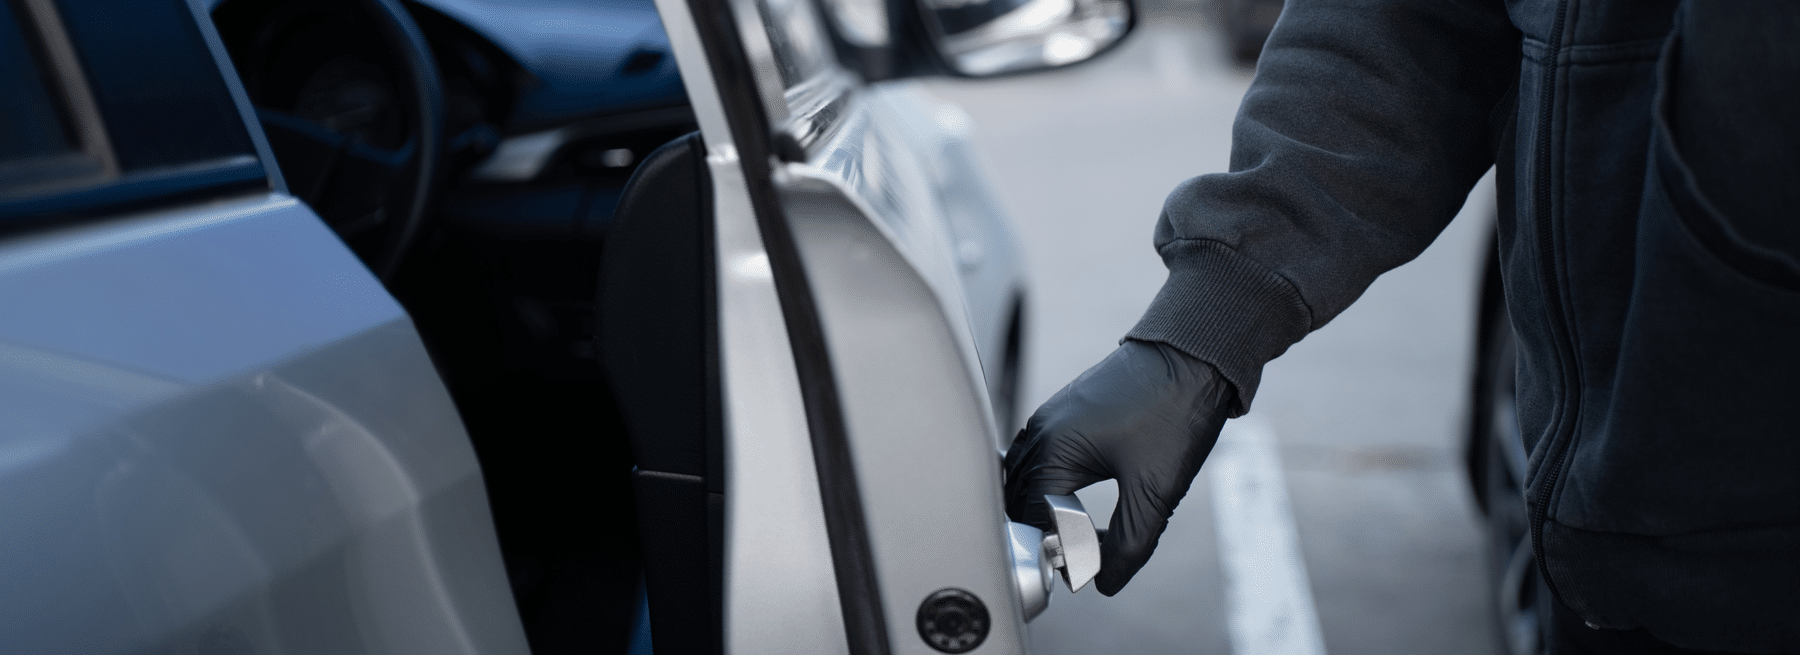 vehicle thefts set to break record